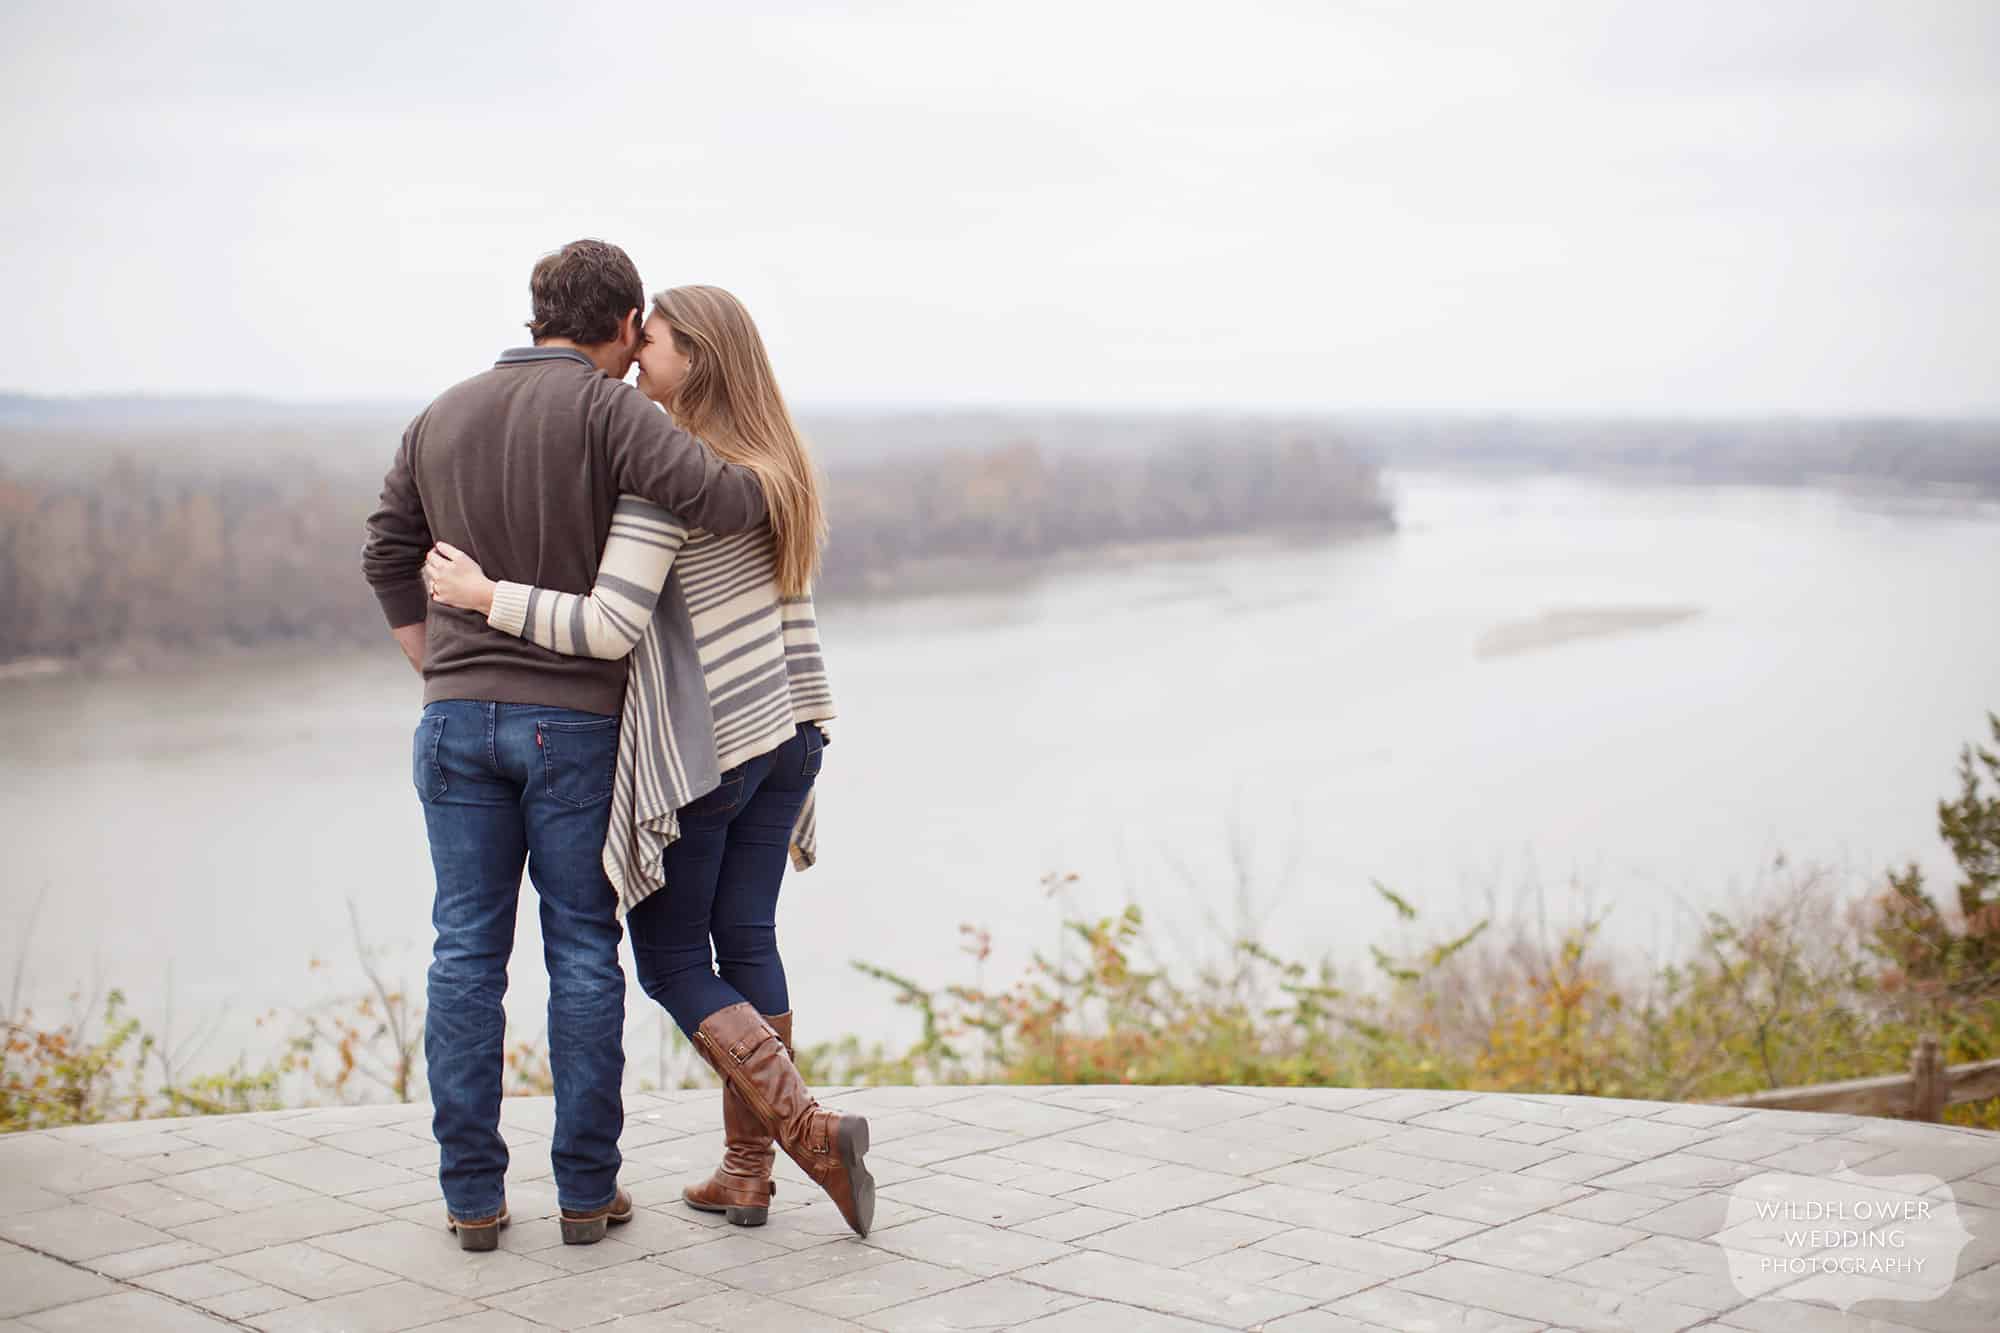 The newly engaged couple stands at the edge of the blufftop overlooking the Missouri River after a surprise wedding proposal photography shoot.